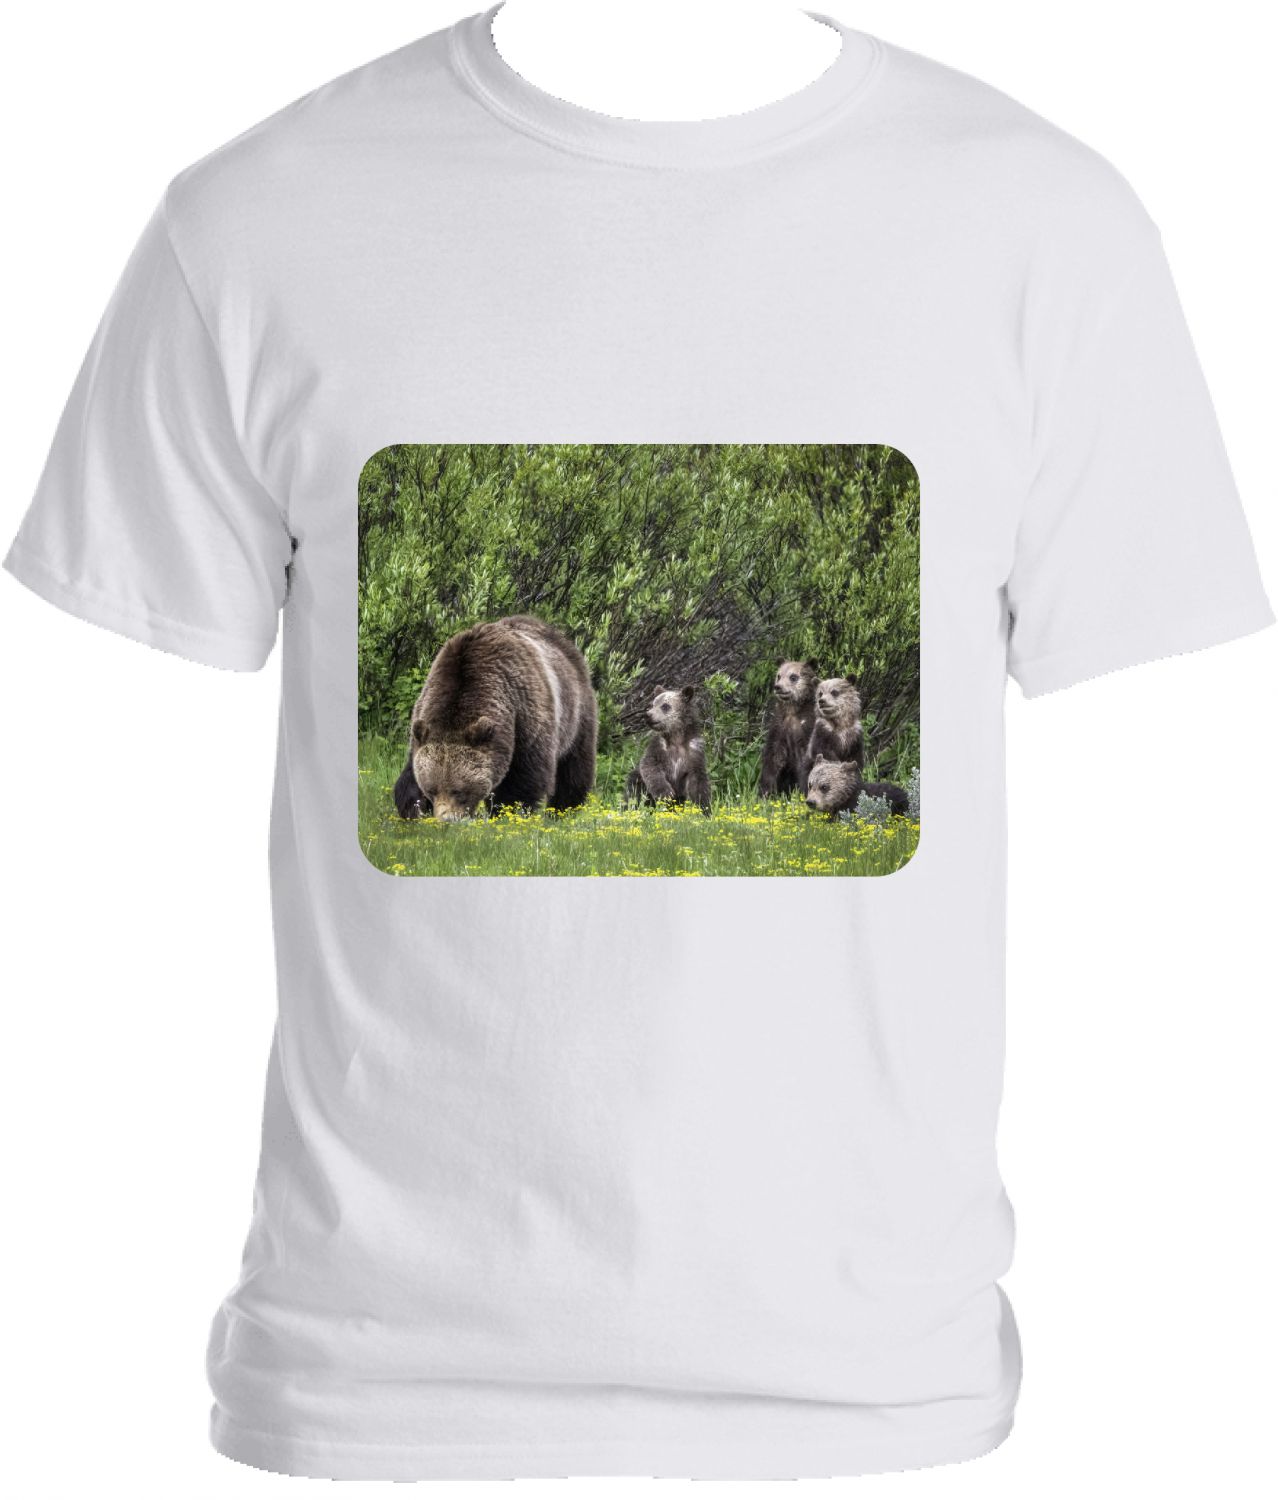 Grizzly 399 and Quad cubs T Shirt